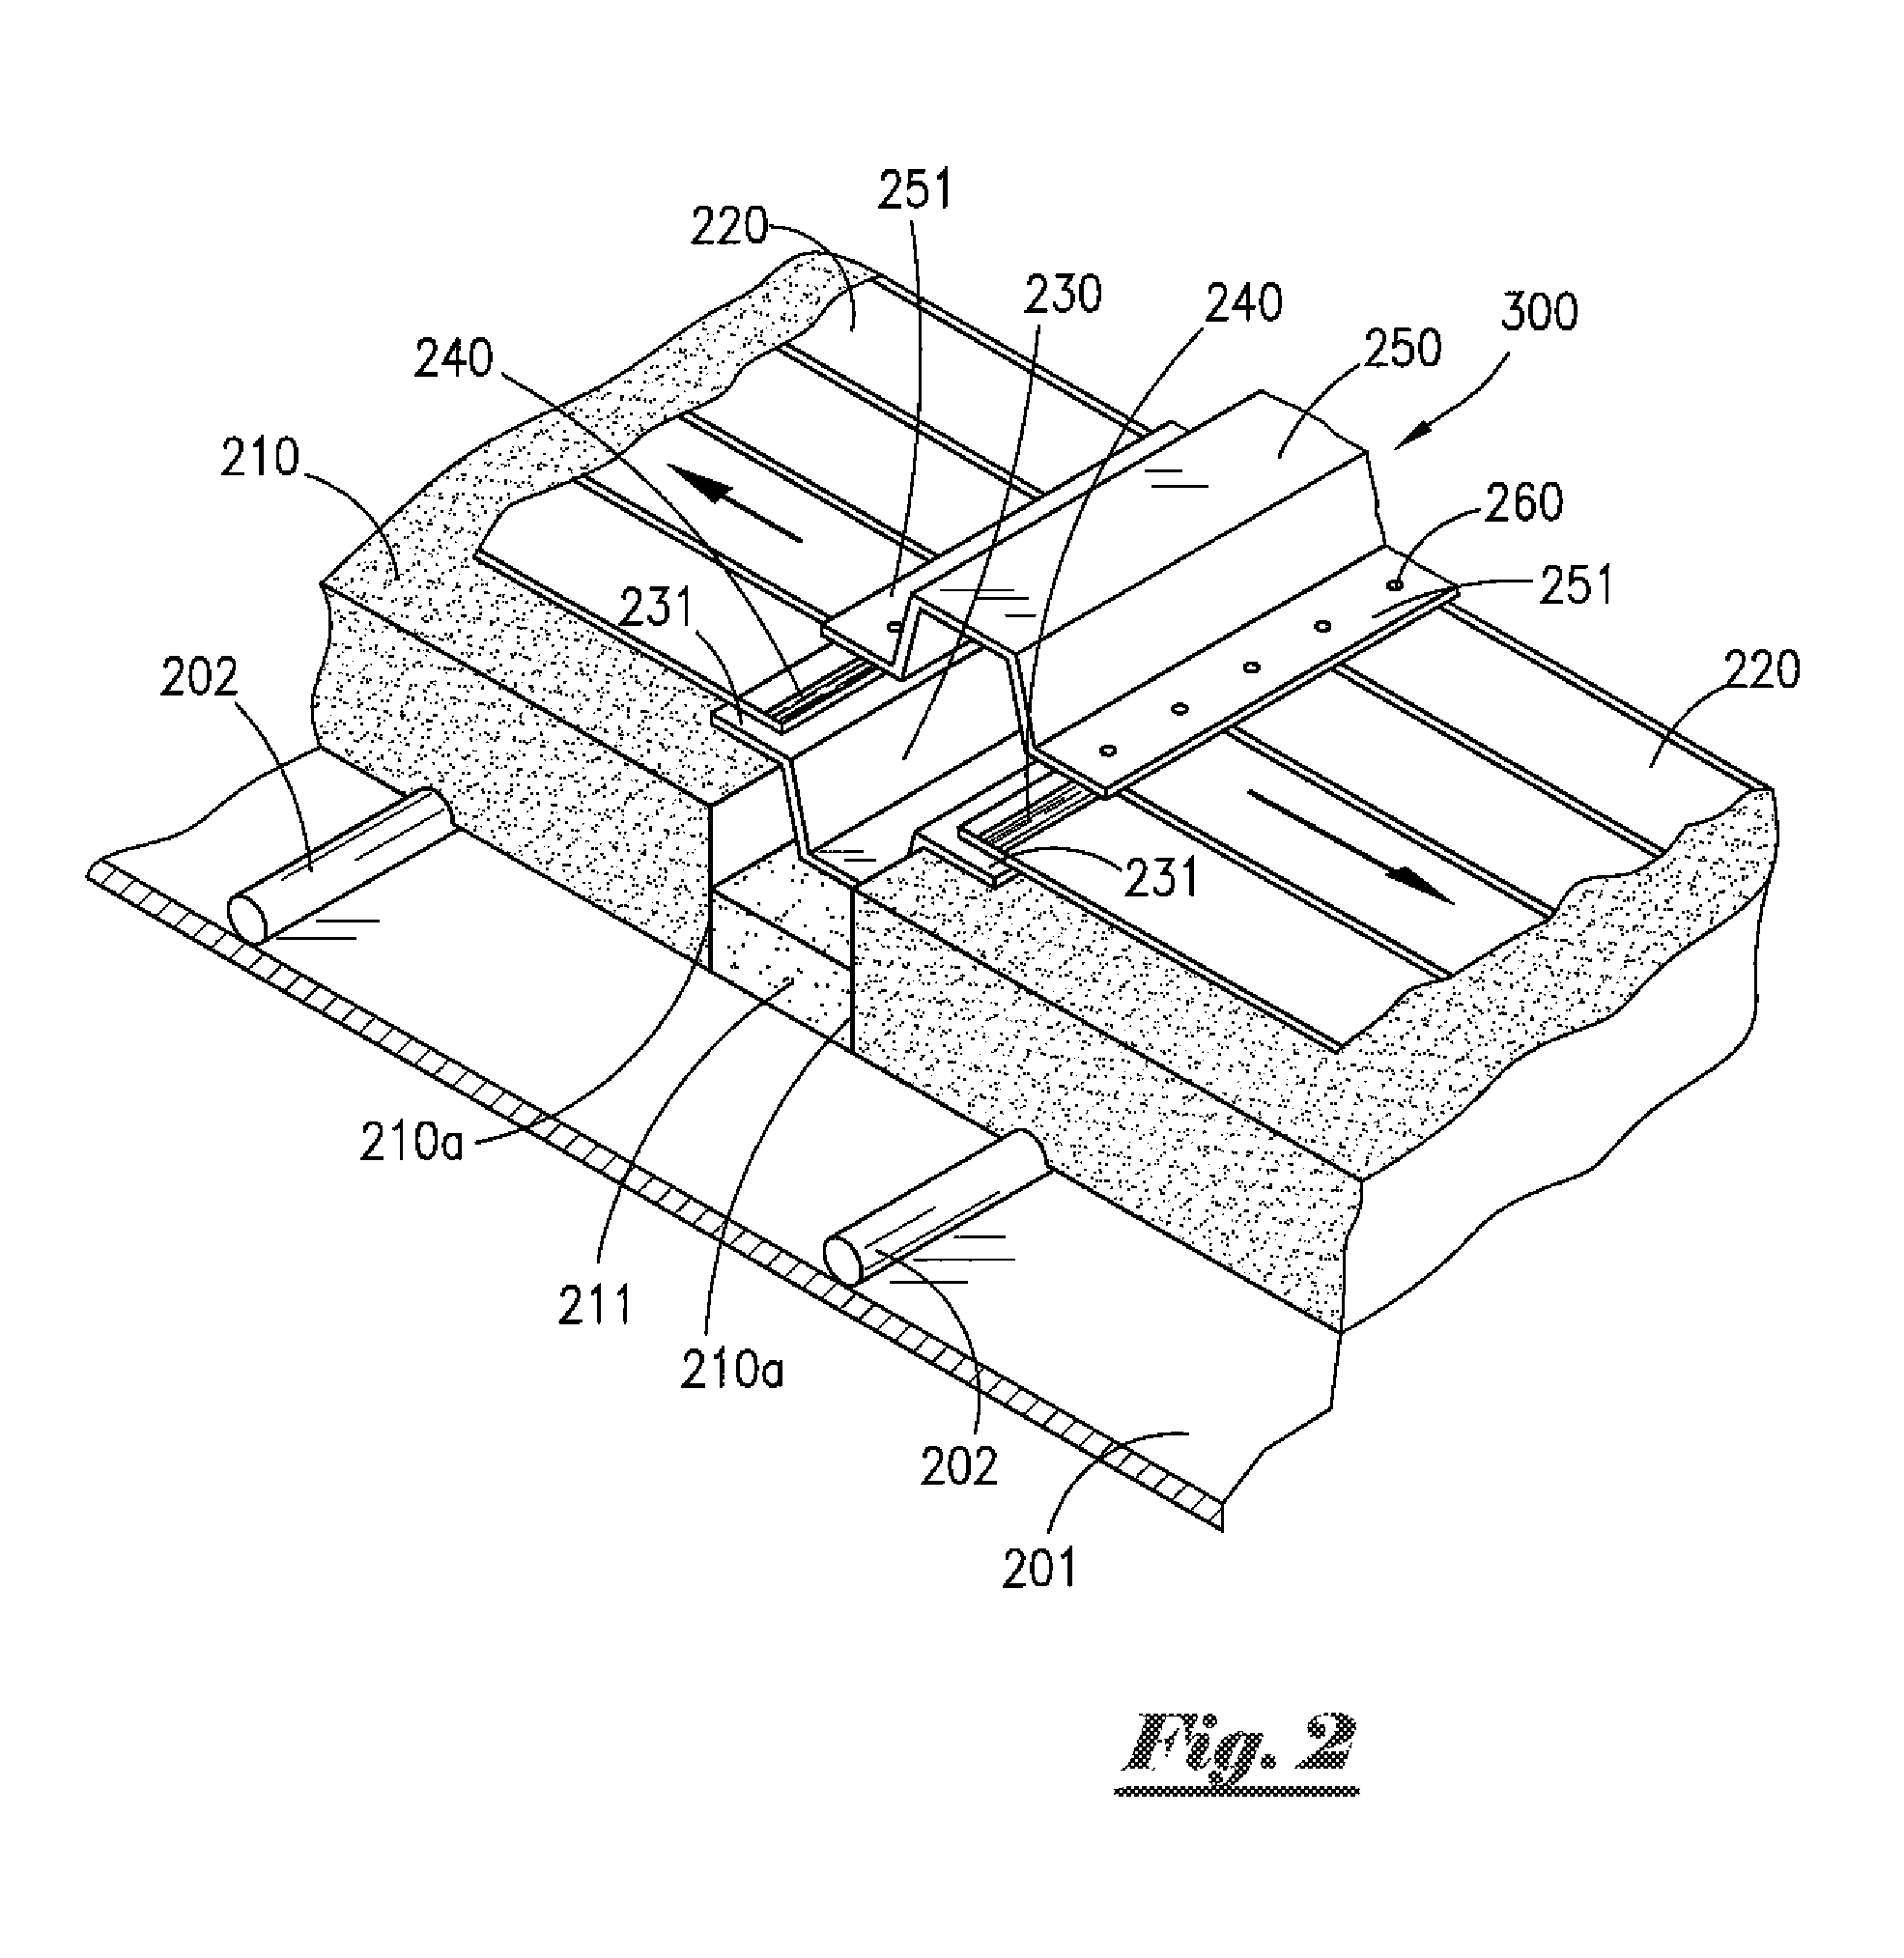 Storage tank insulation joint apparatus and method